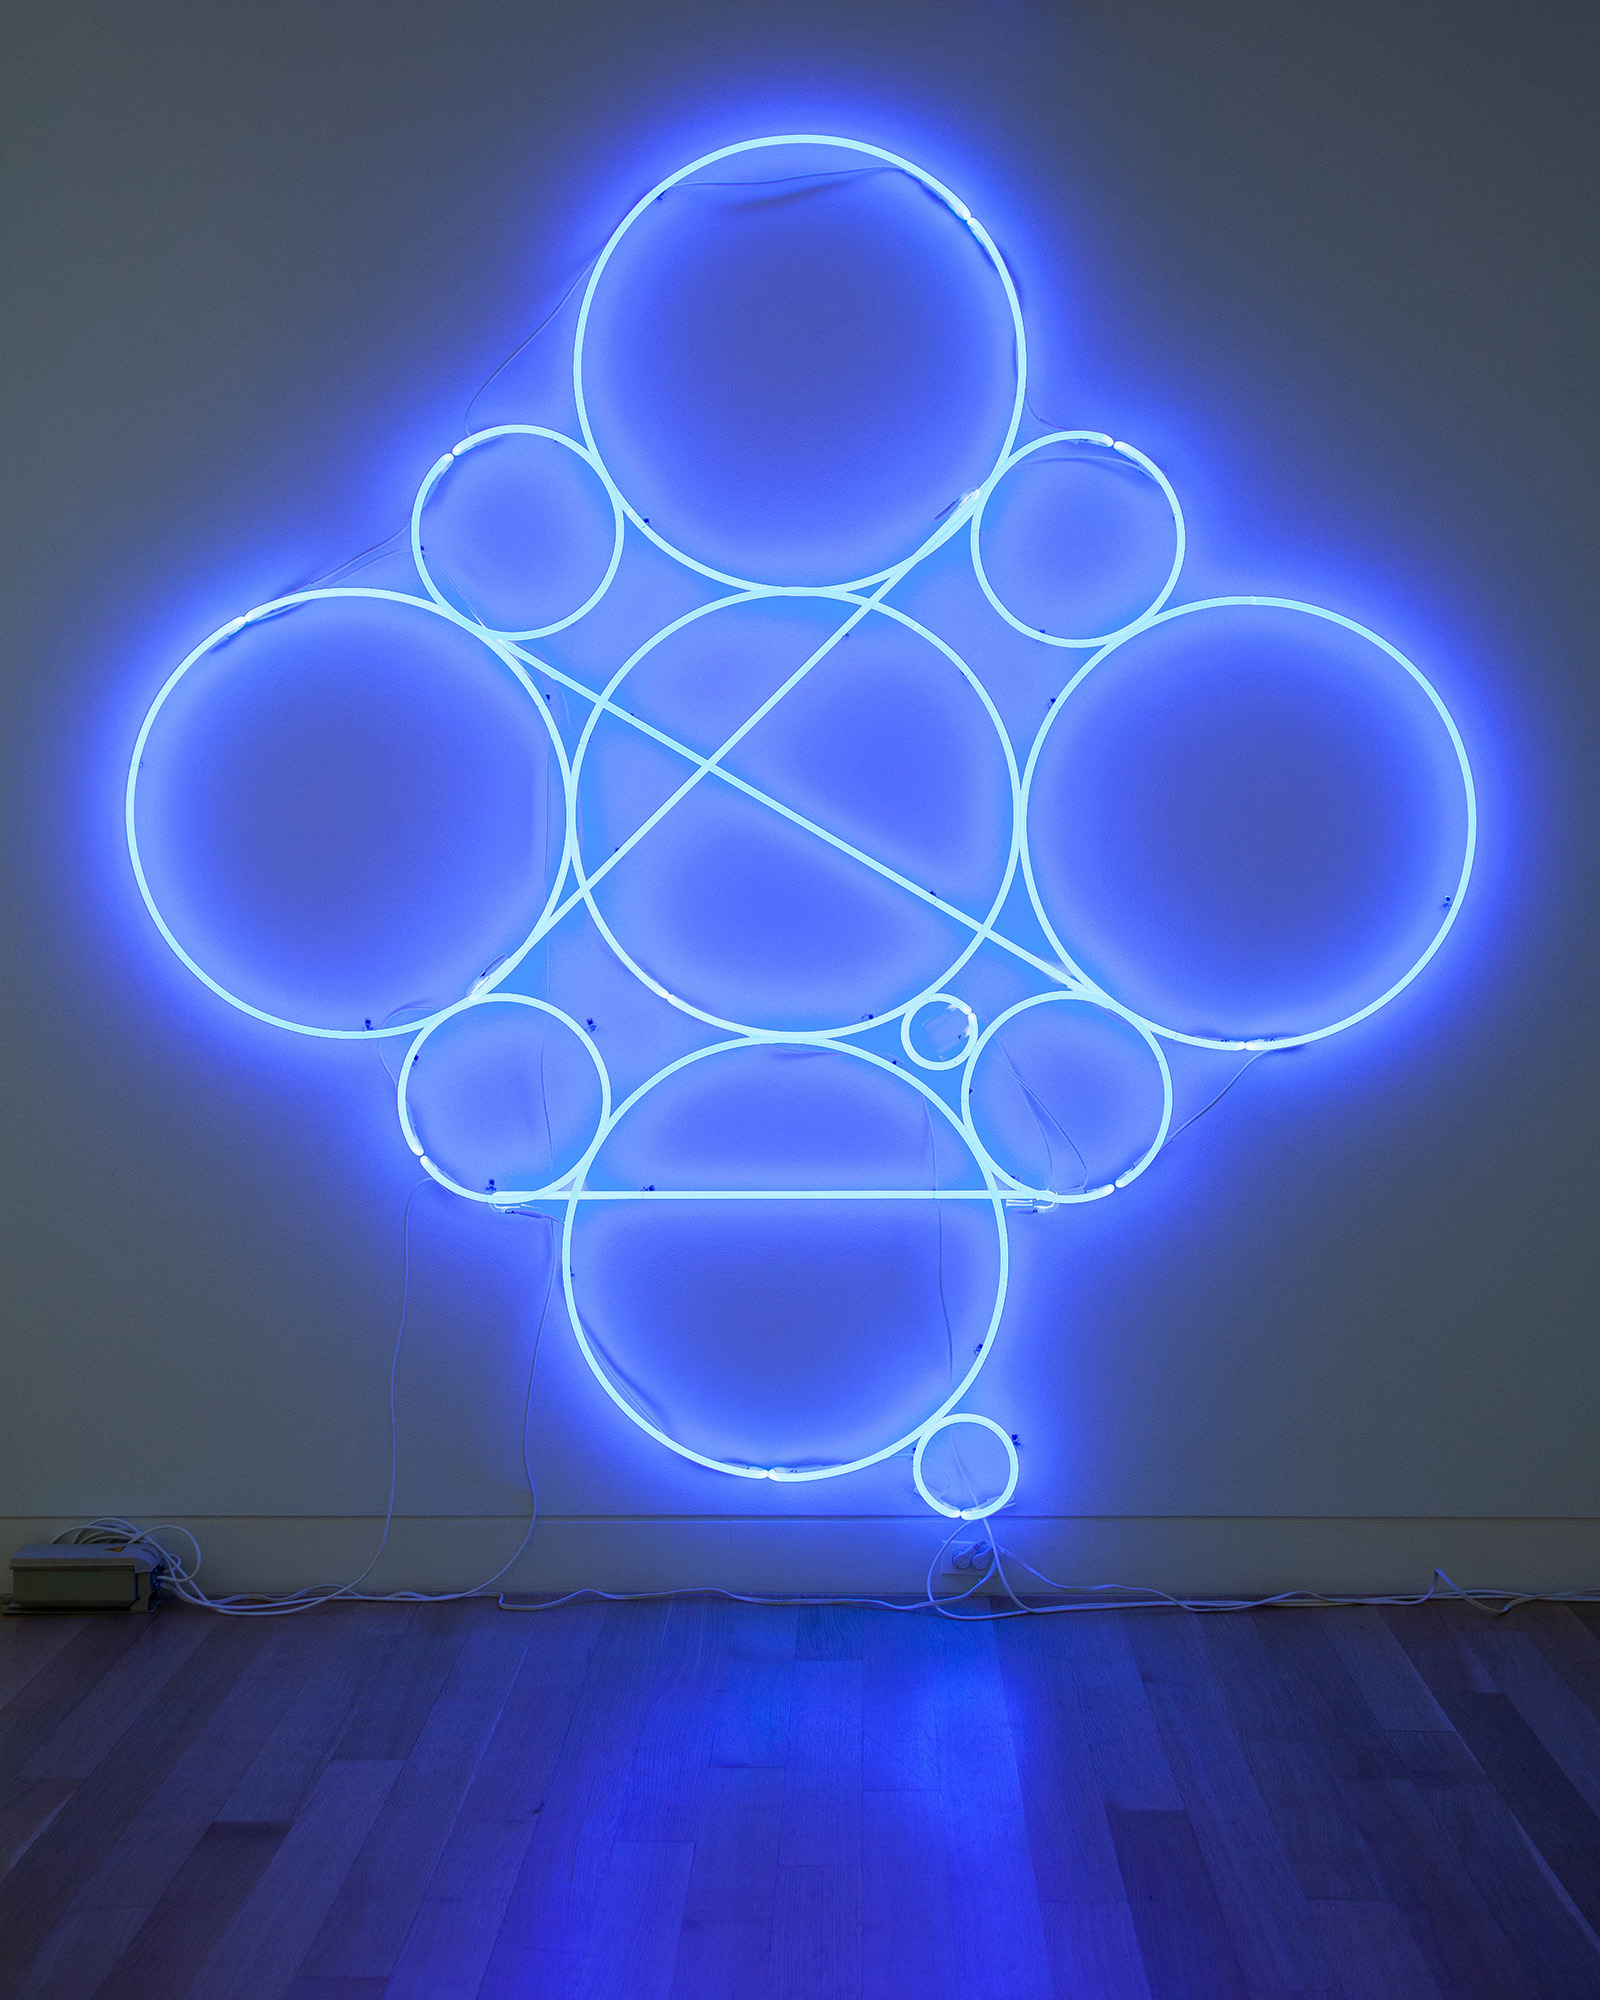 Mai-Thu Perret, 2016 2011. Courtesy of the artist and David Kordansky Gallery, Los Angeles. Installation view in New Age, New Age: Strategies for Survival at DePaul Art Museum, 2019. Photo: DePaul Art Museum